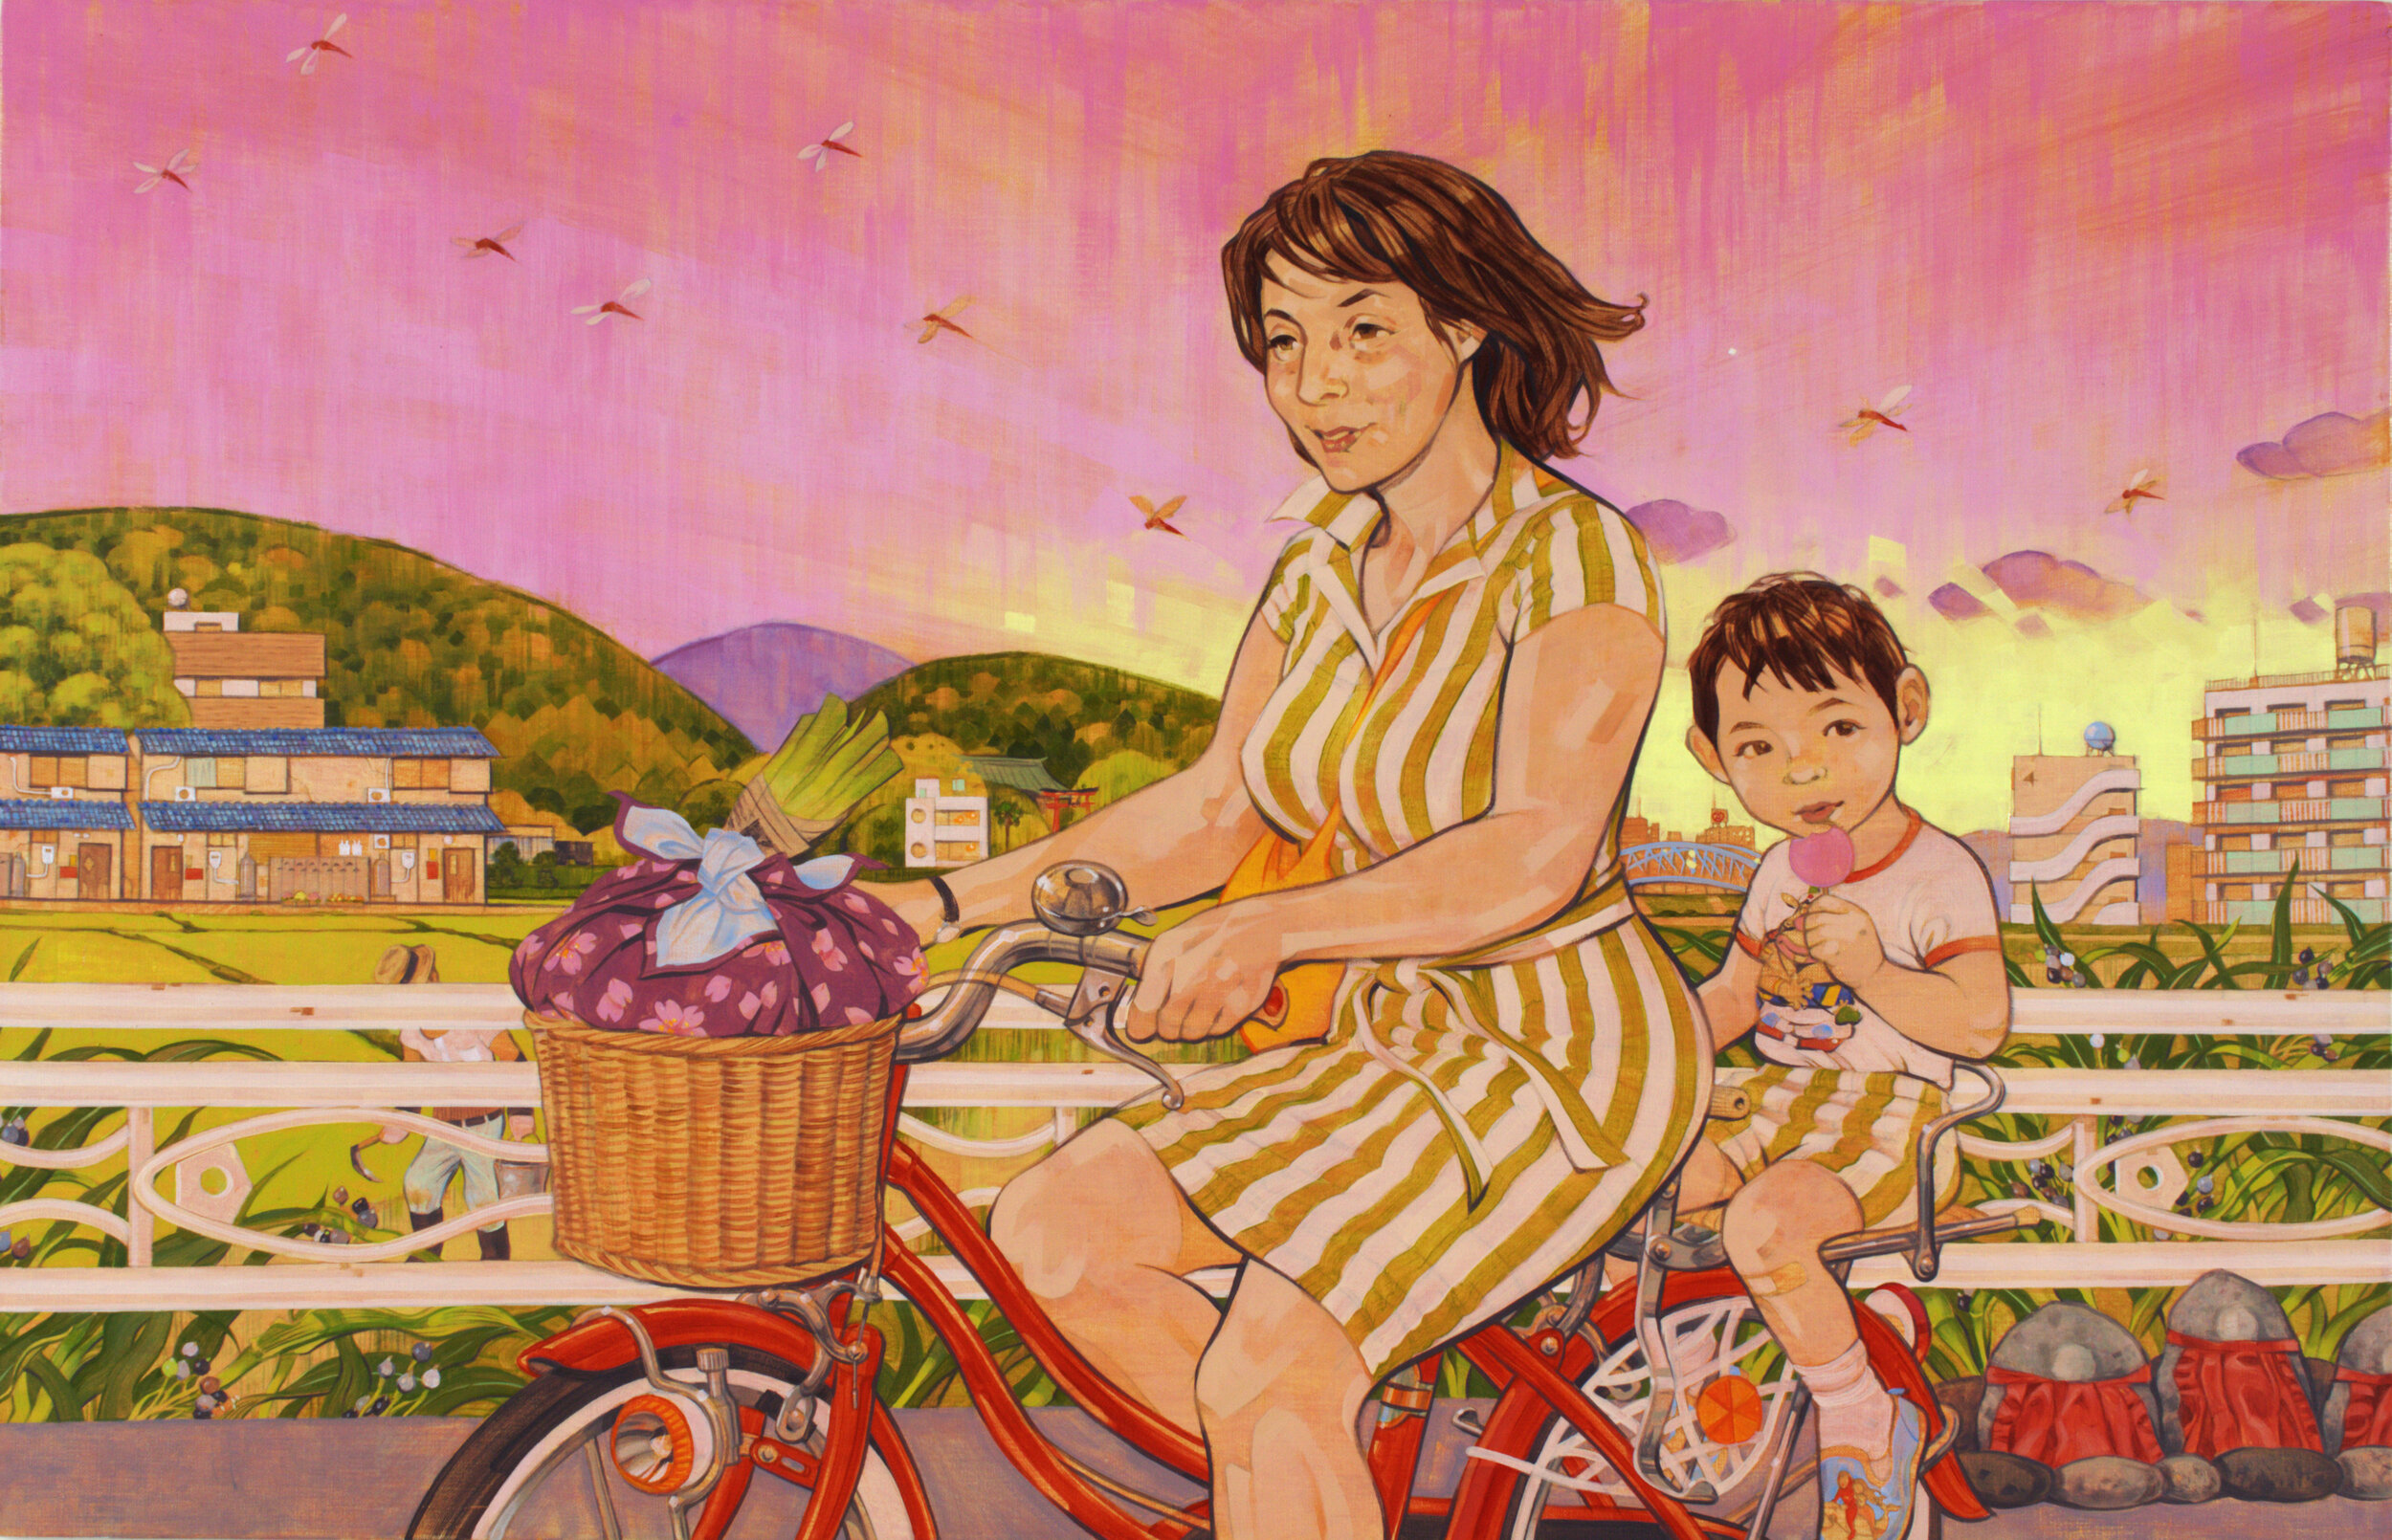 Mama's Song, 2019, oil on linen, 28 x 43 inches, by Taiyo la Paix